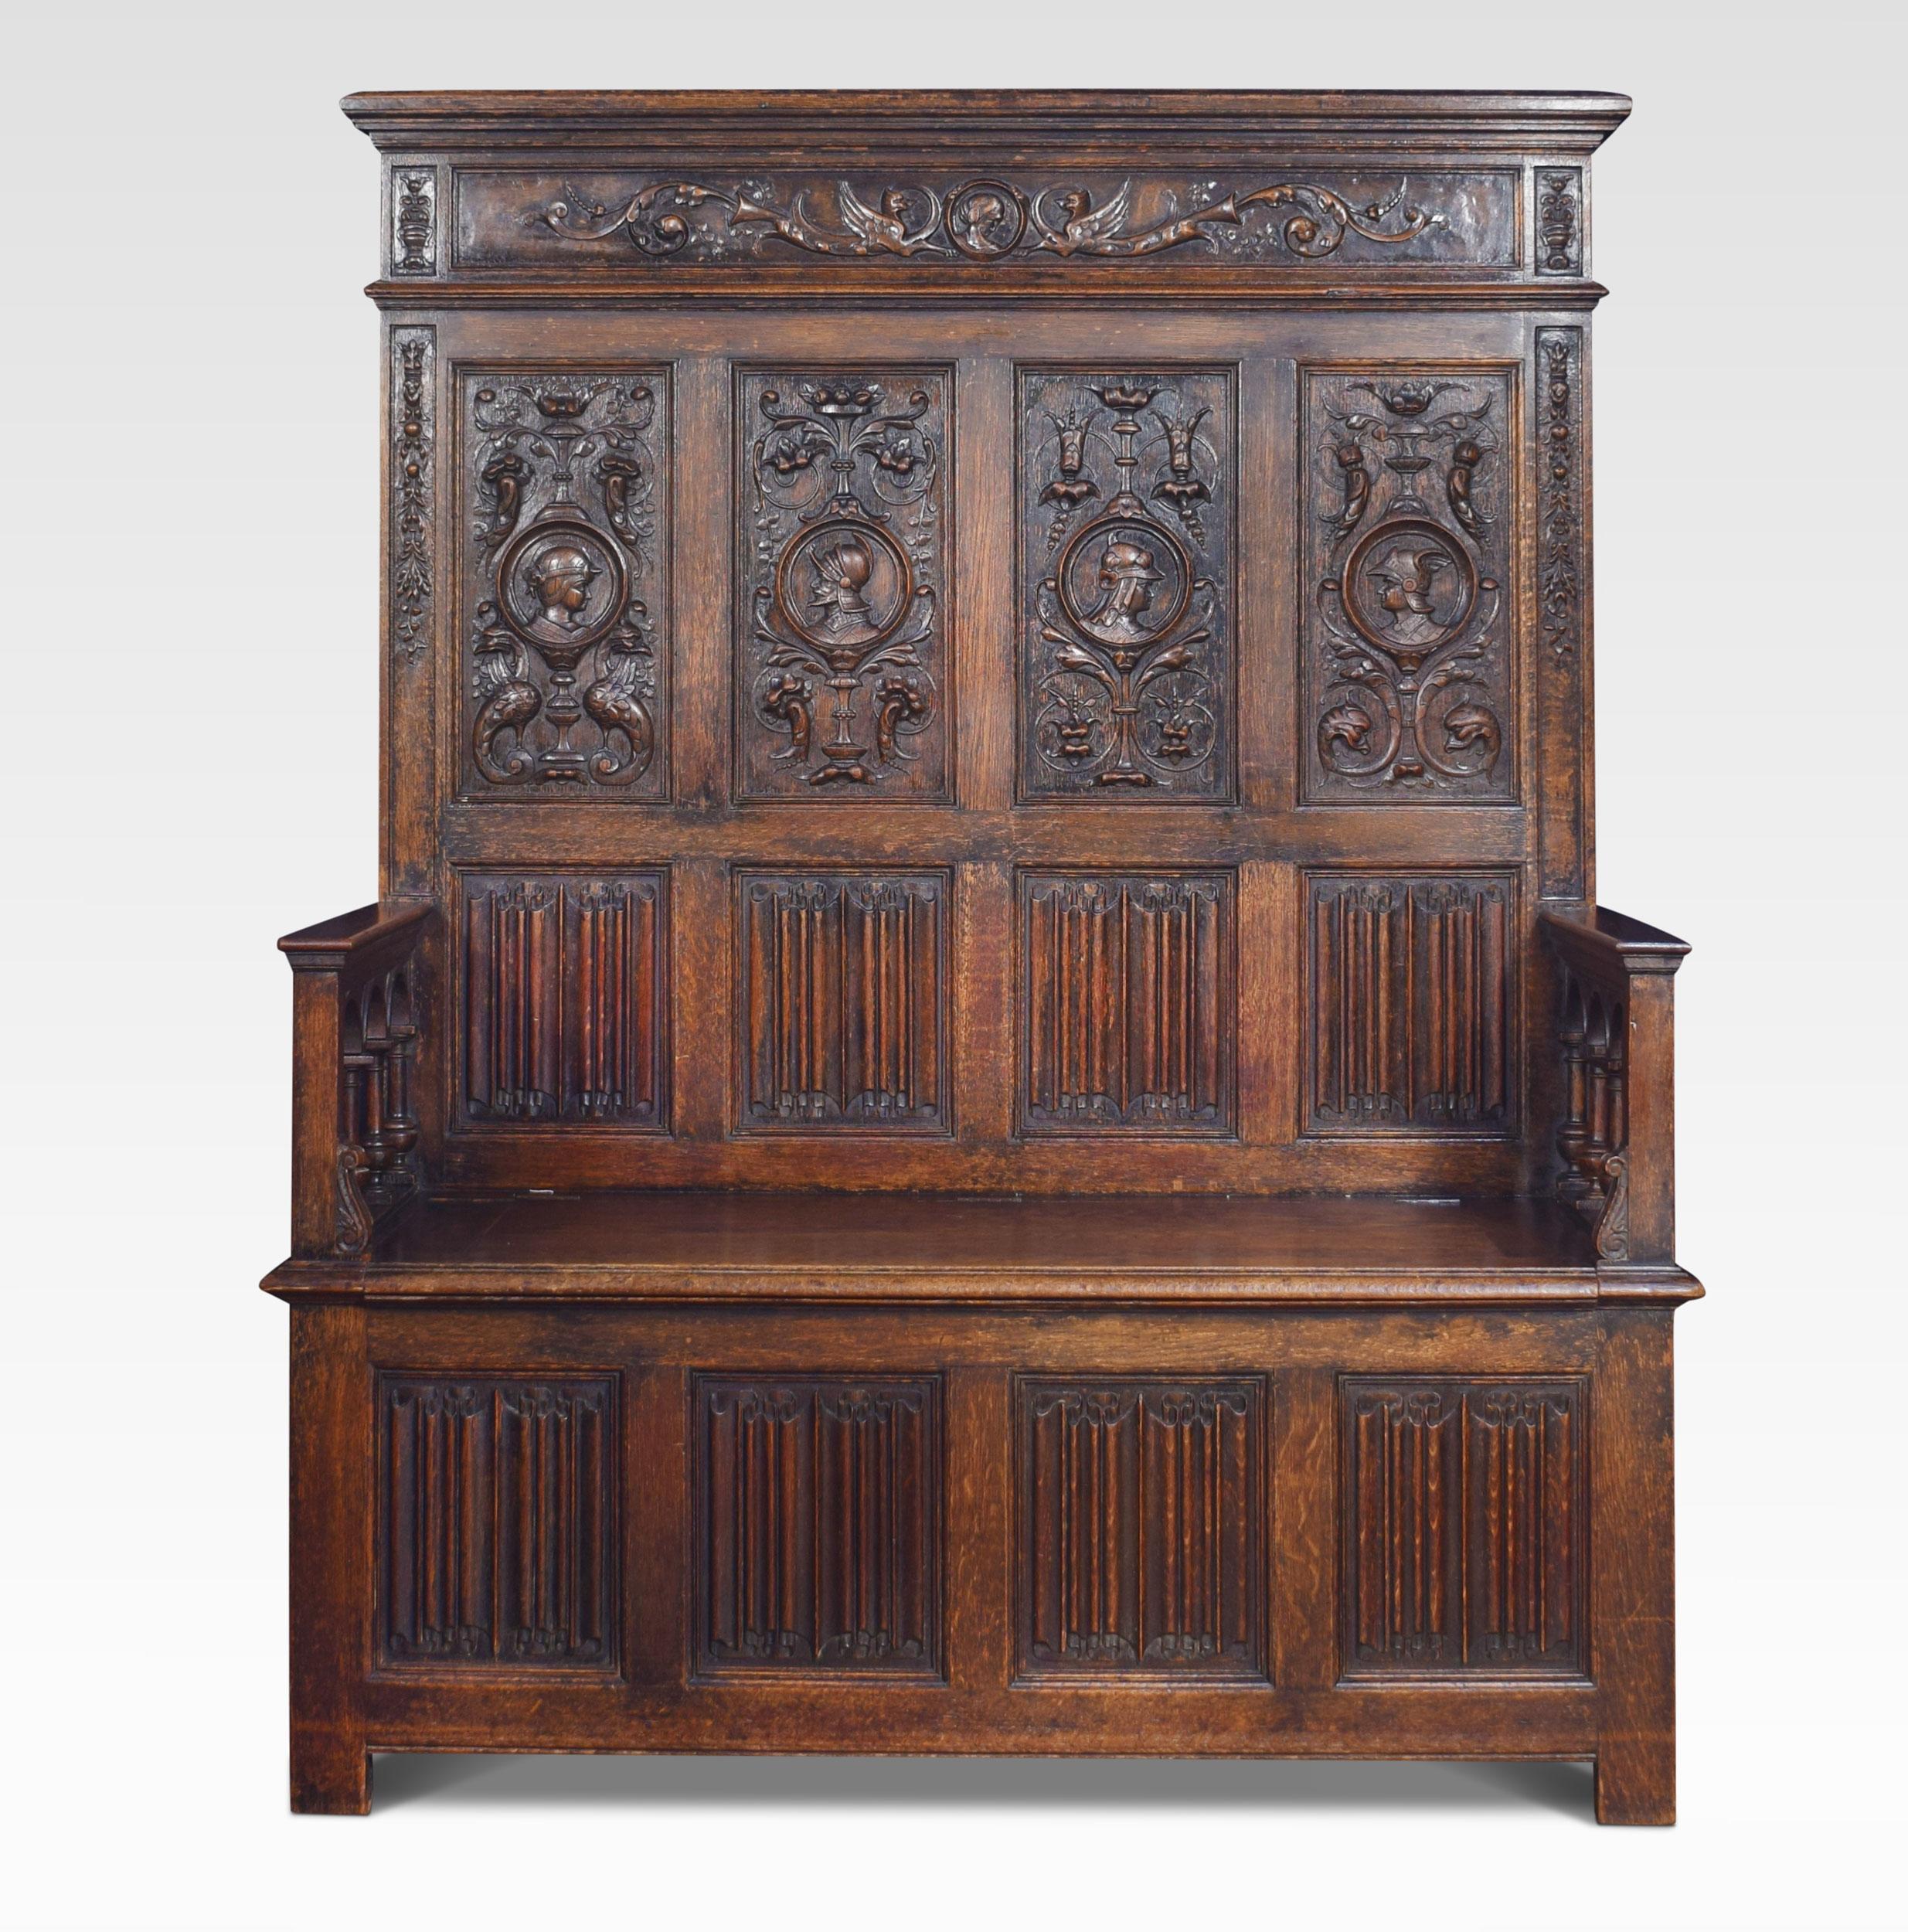 Oak box settle, in the 17th century style, the high back with four panels each centred with a carved knights mask within a moulded roundel, above four linenfold panels, the plain arms raised upon arcaded spindles to the hinged box section and